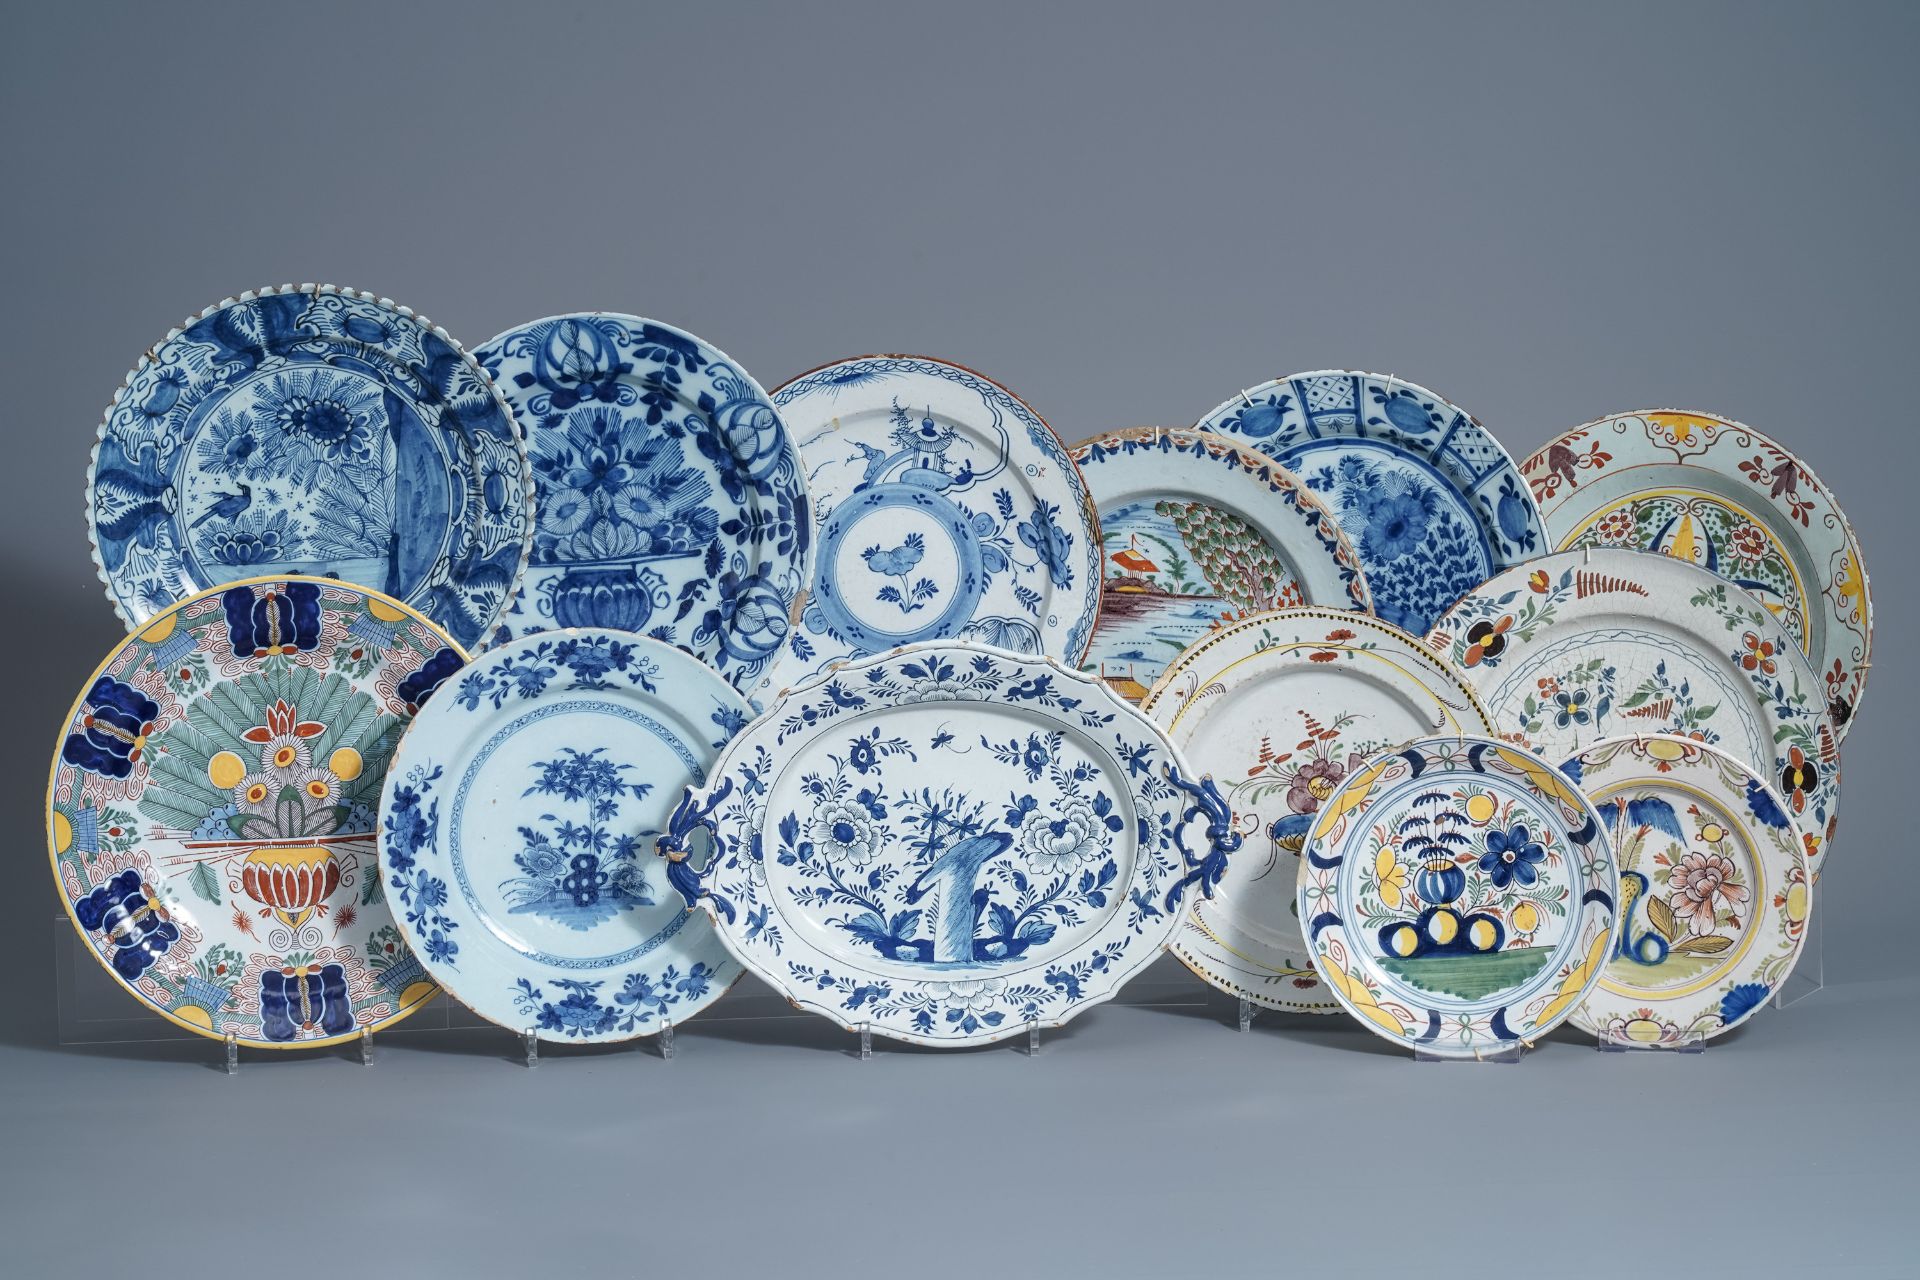 Twelve polychrome and blue and white Dutch Delft plates and an oval tray, 18th C.